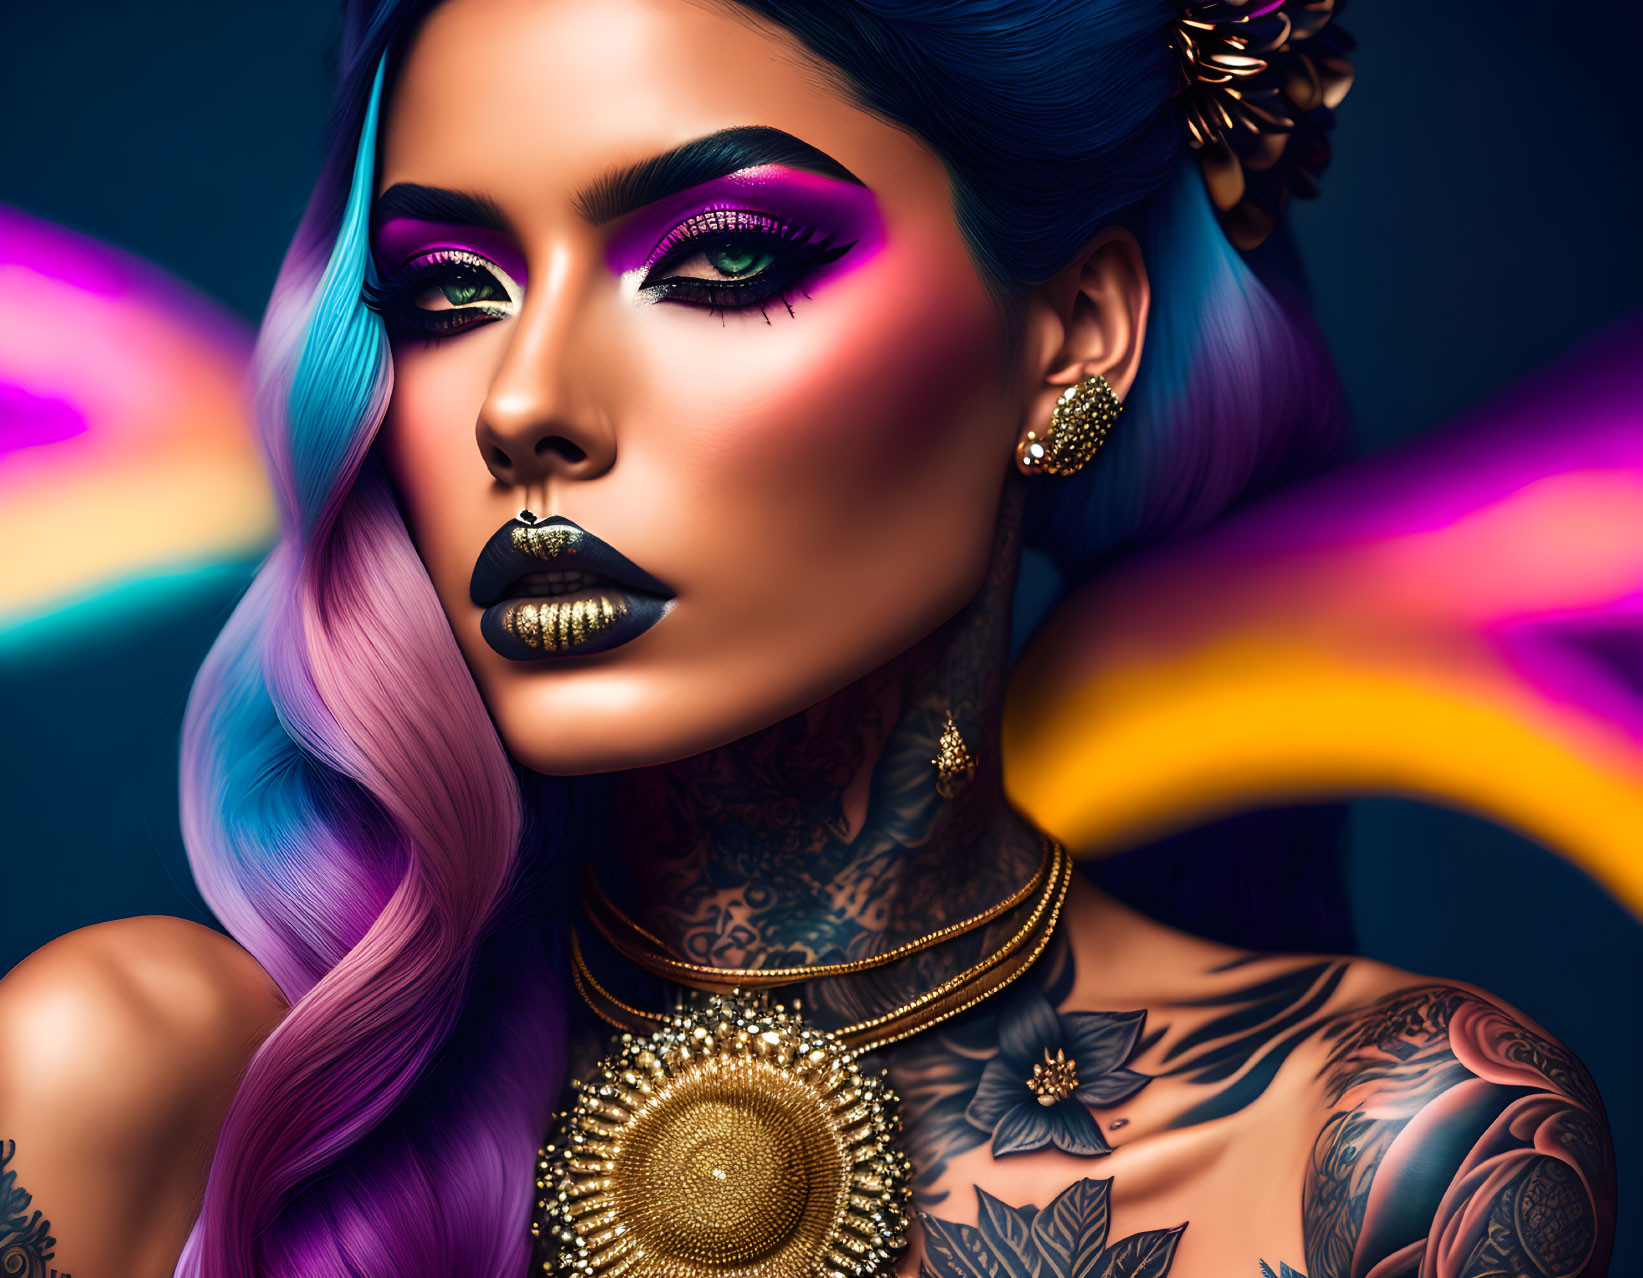 Colorful Woman with Pastel Hair, Bold Makeup, Tattoos, and Jewelry